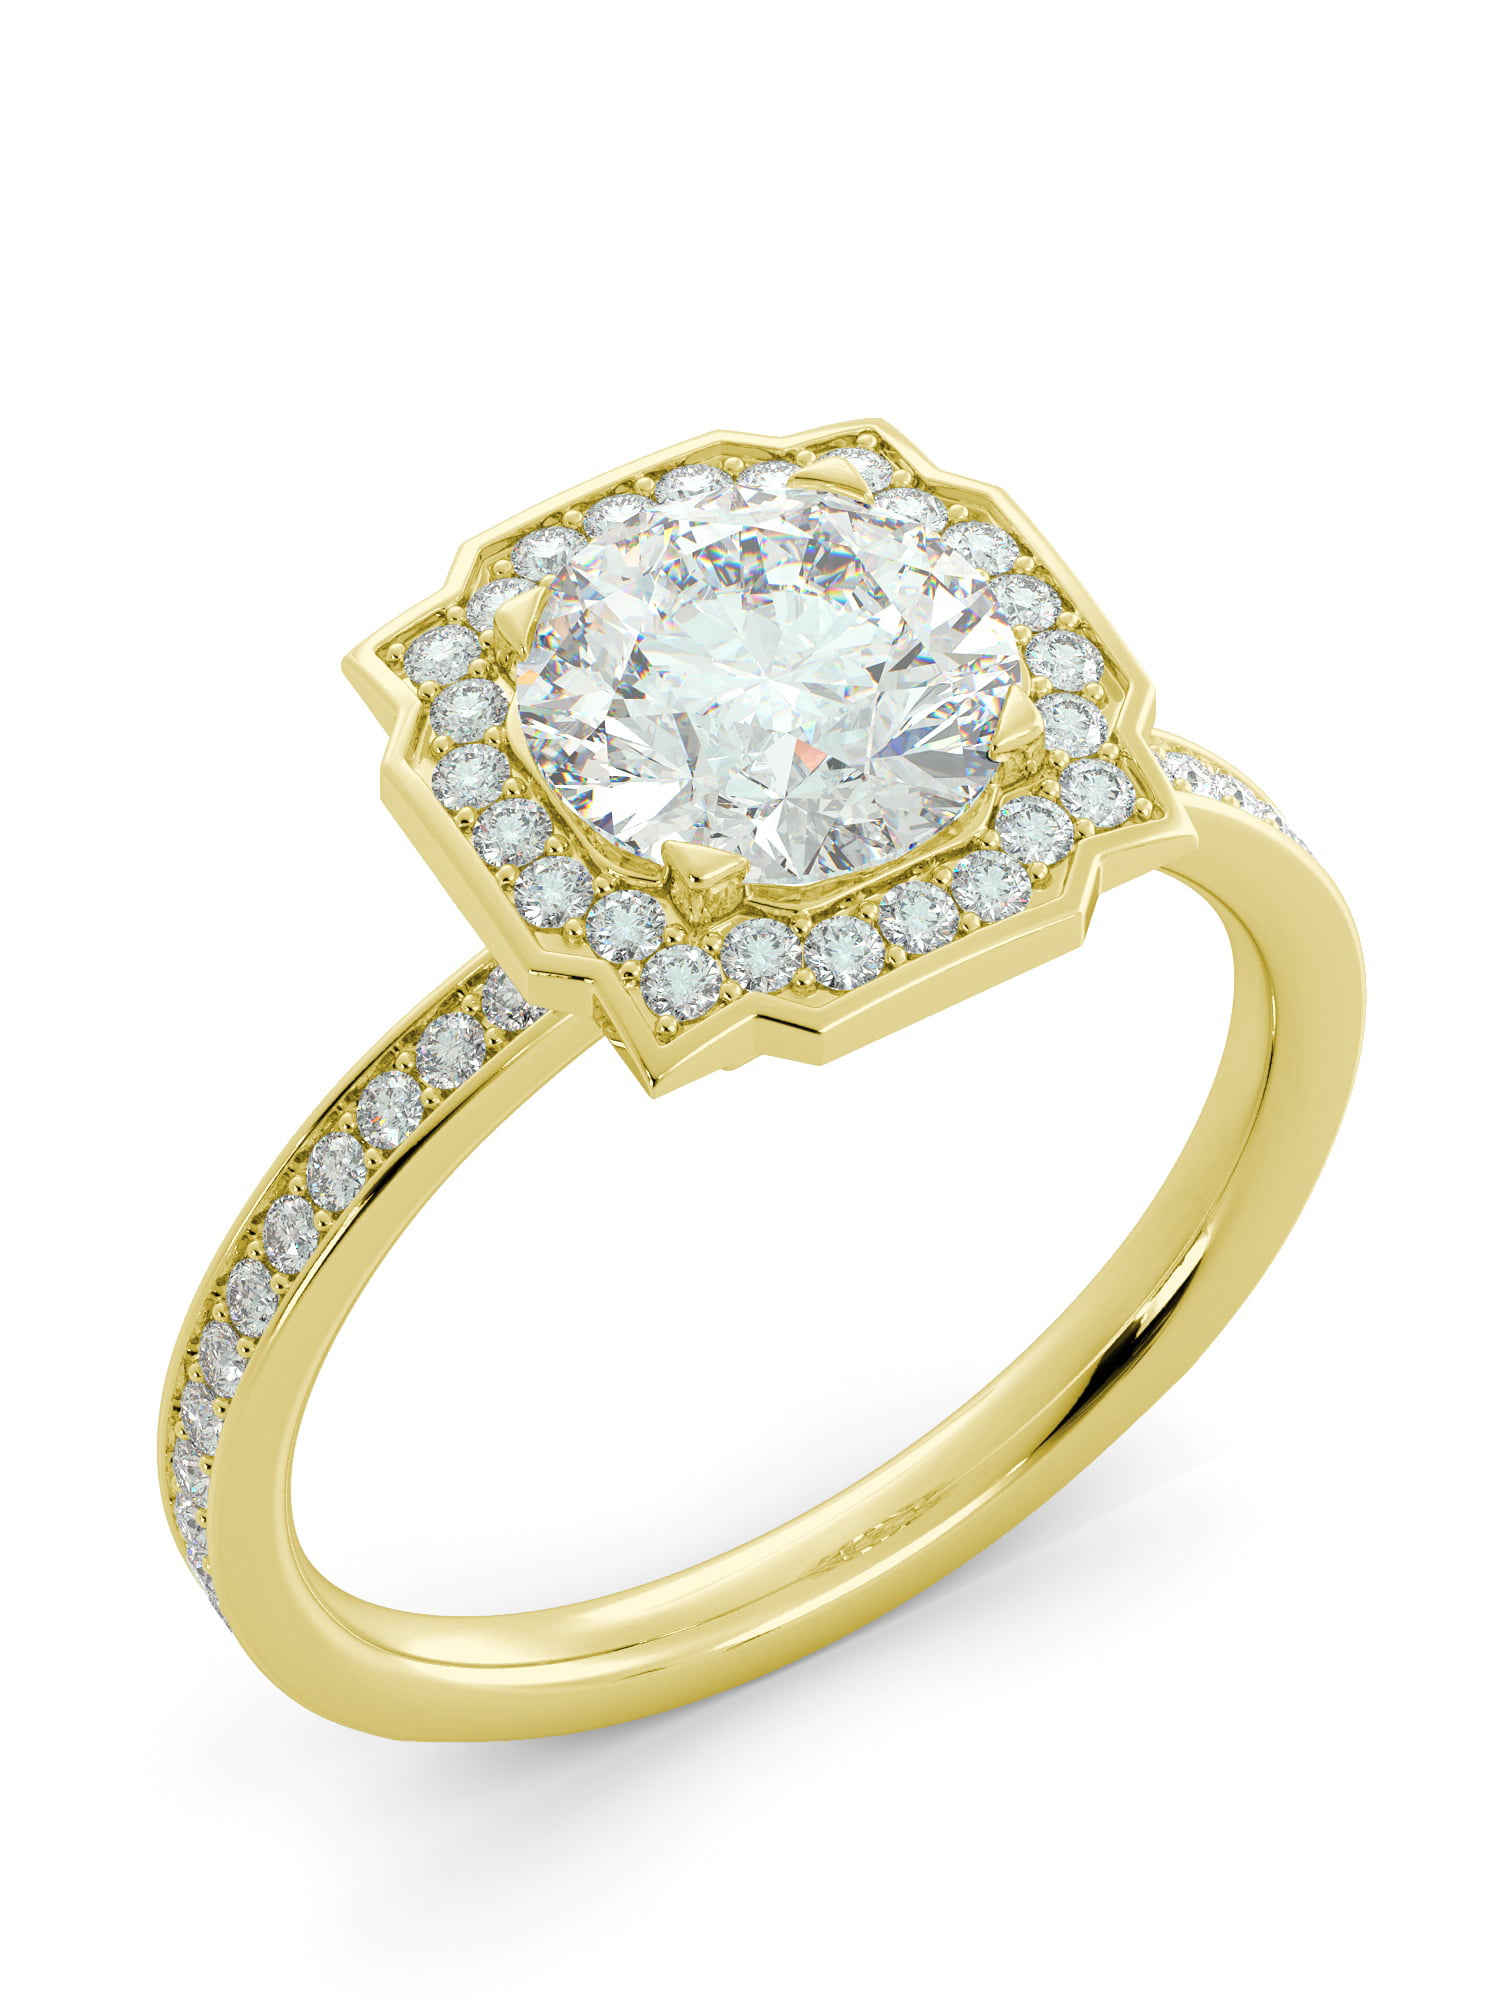 Glorious Round Shape 14KT Yellow Gold 2.10Ct Solitaire Women's Engagement Ring 